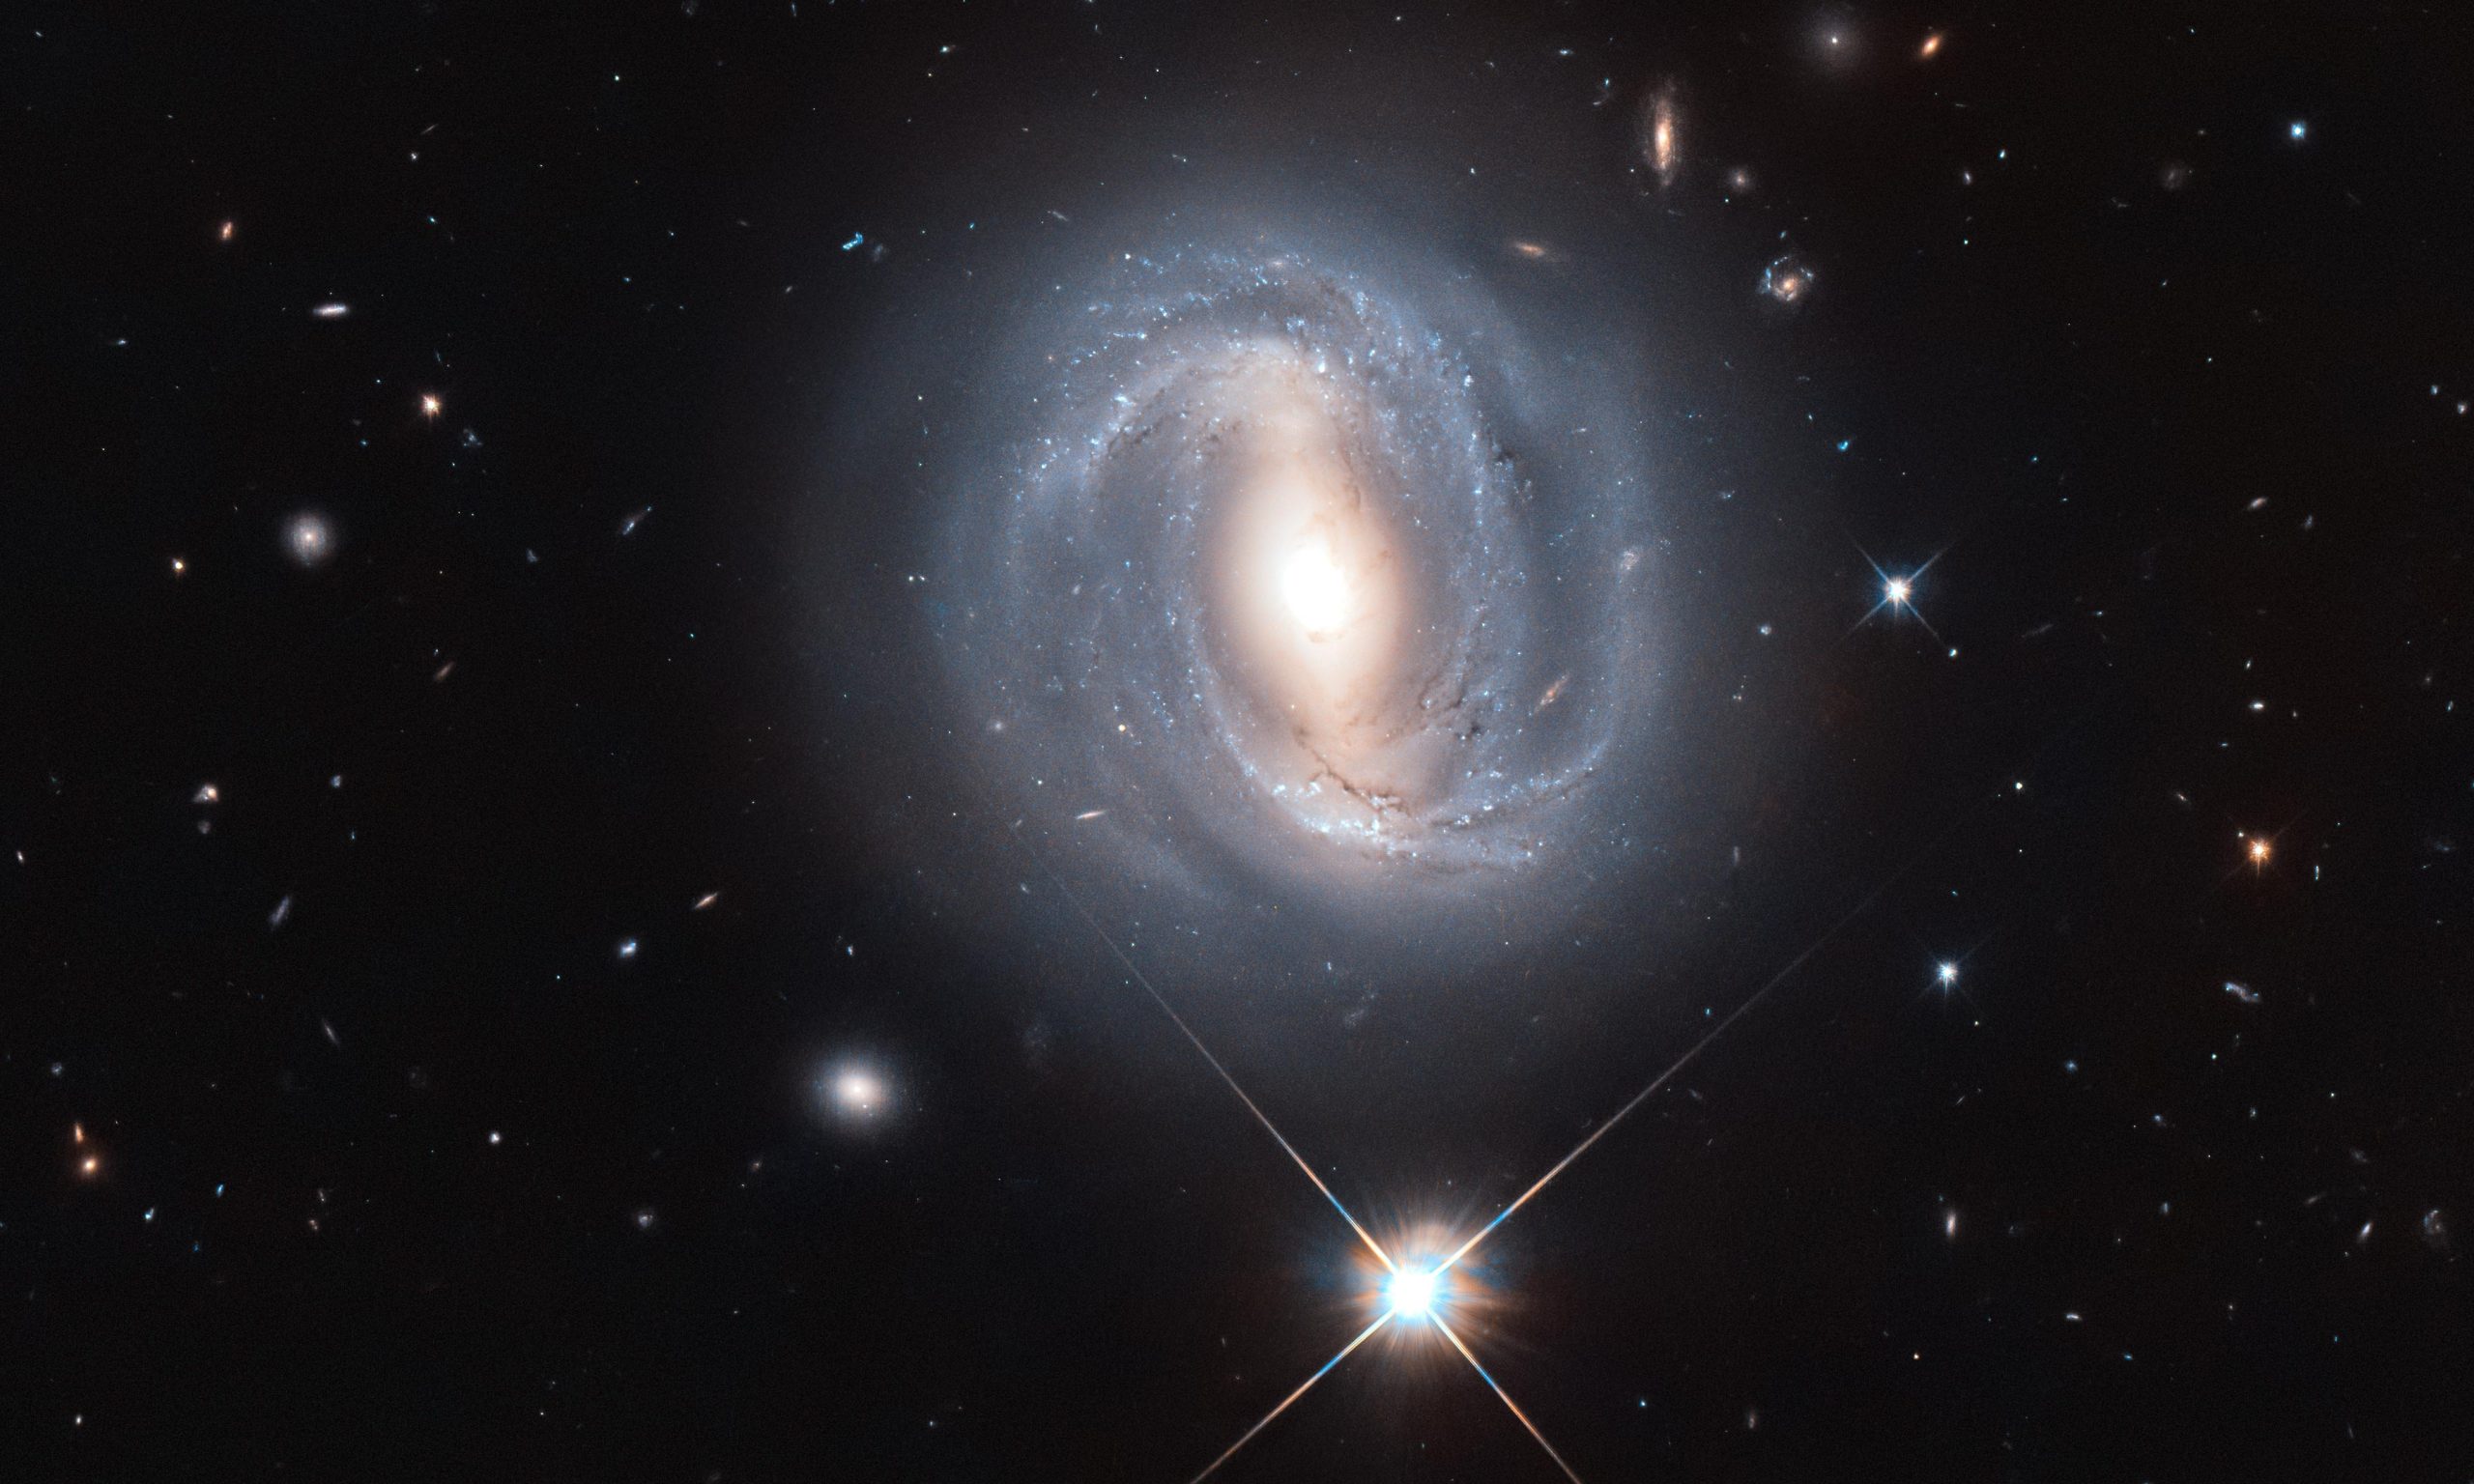 Hubble Space Telescope Sees Near and Far - SciTechDaily